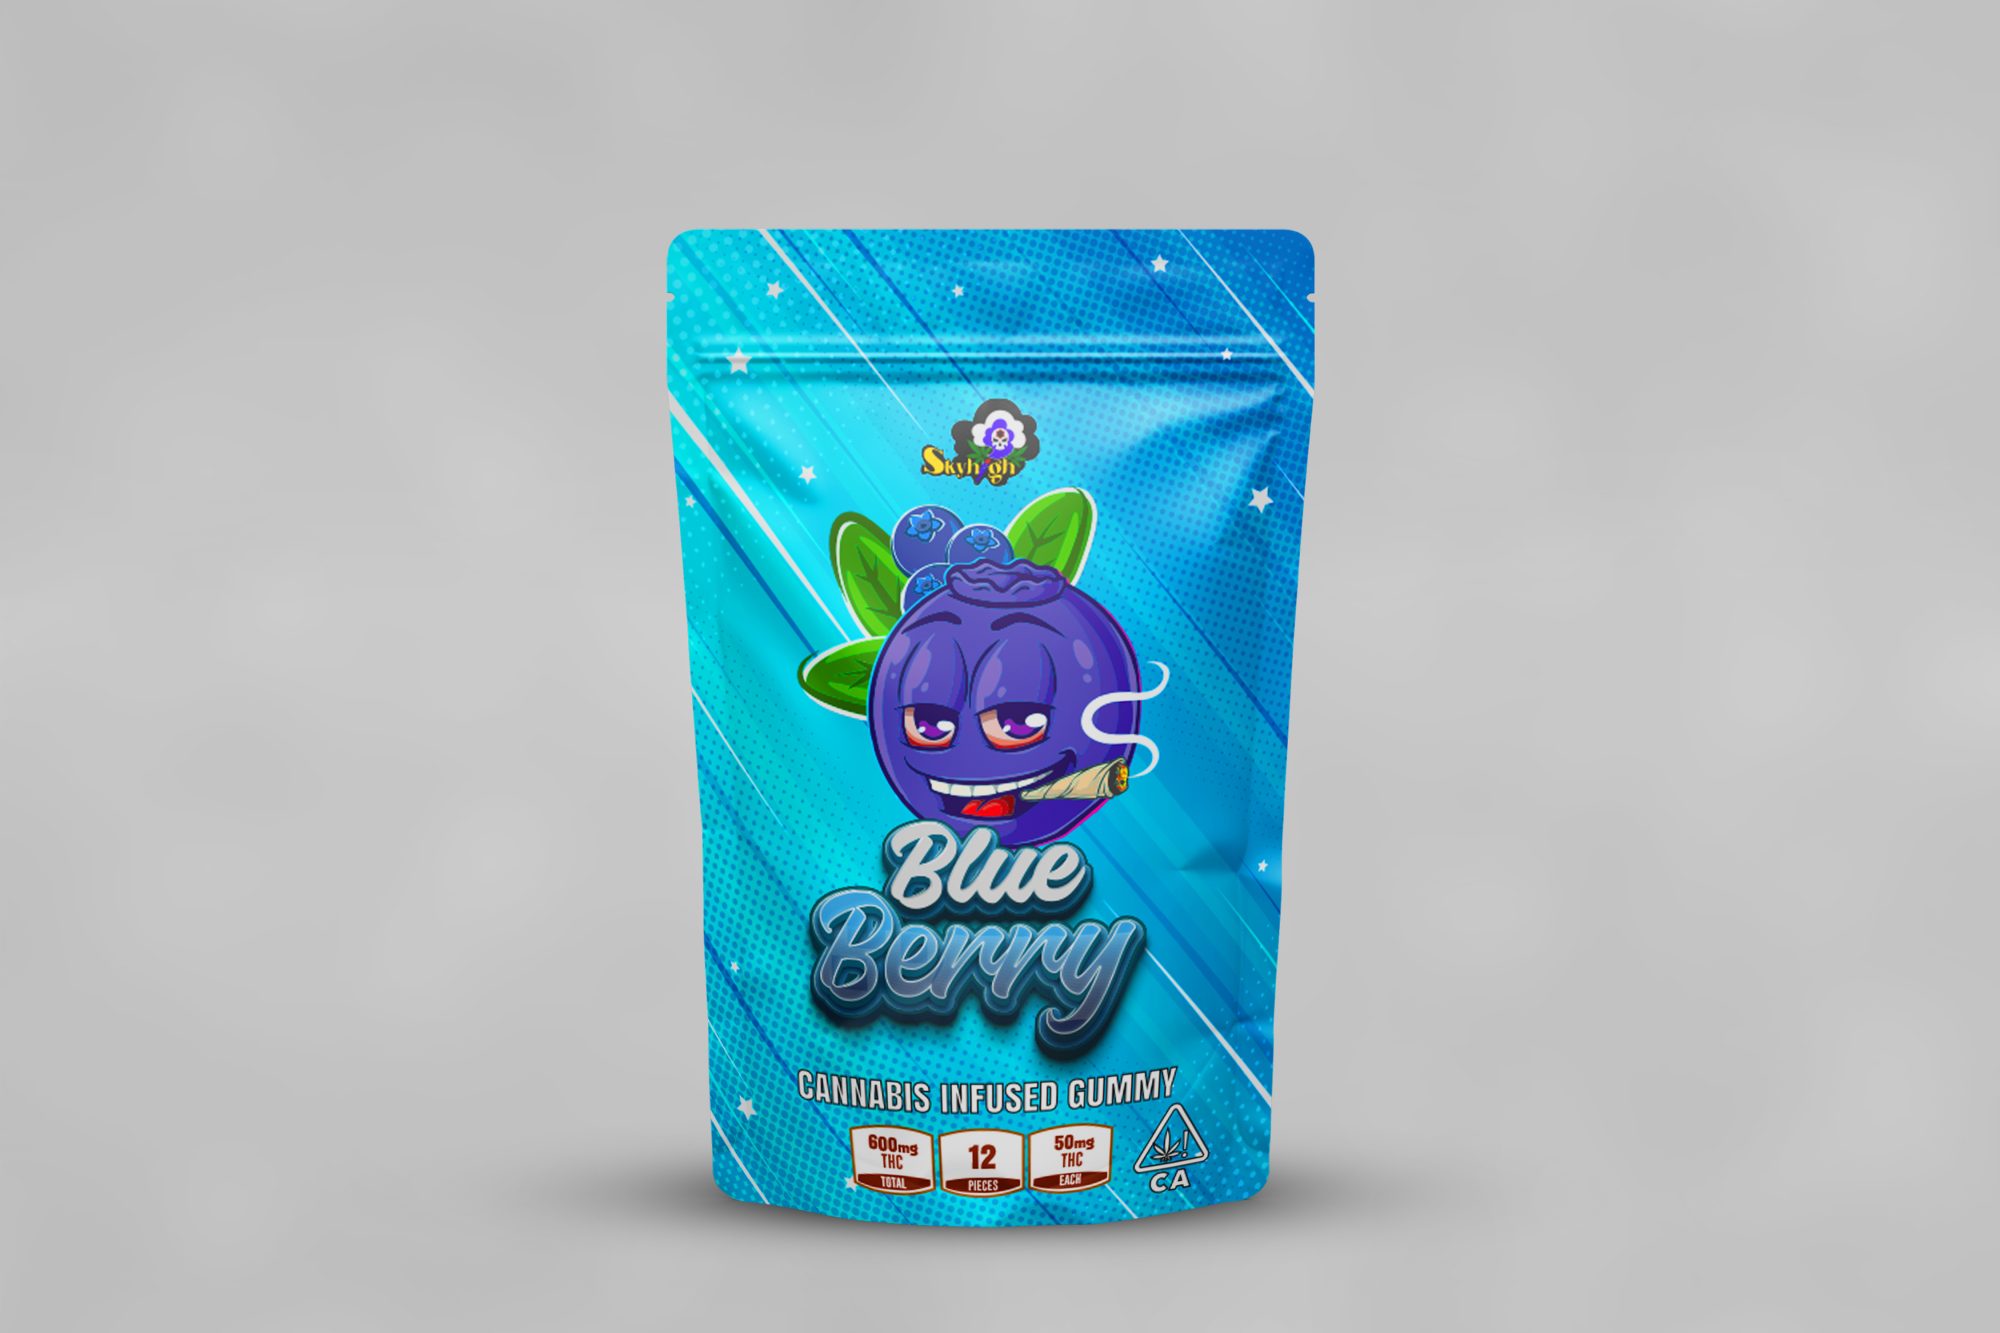 Buy Sky High Edibles - Blueberry Gummy 600mg THC at Wccannabis Online Shop